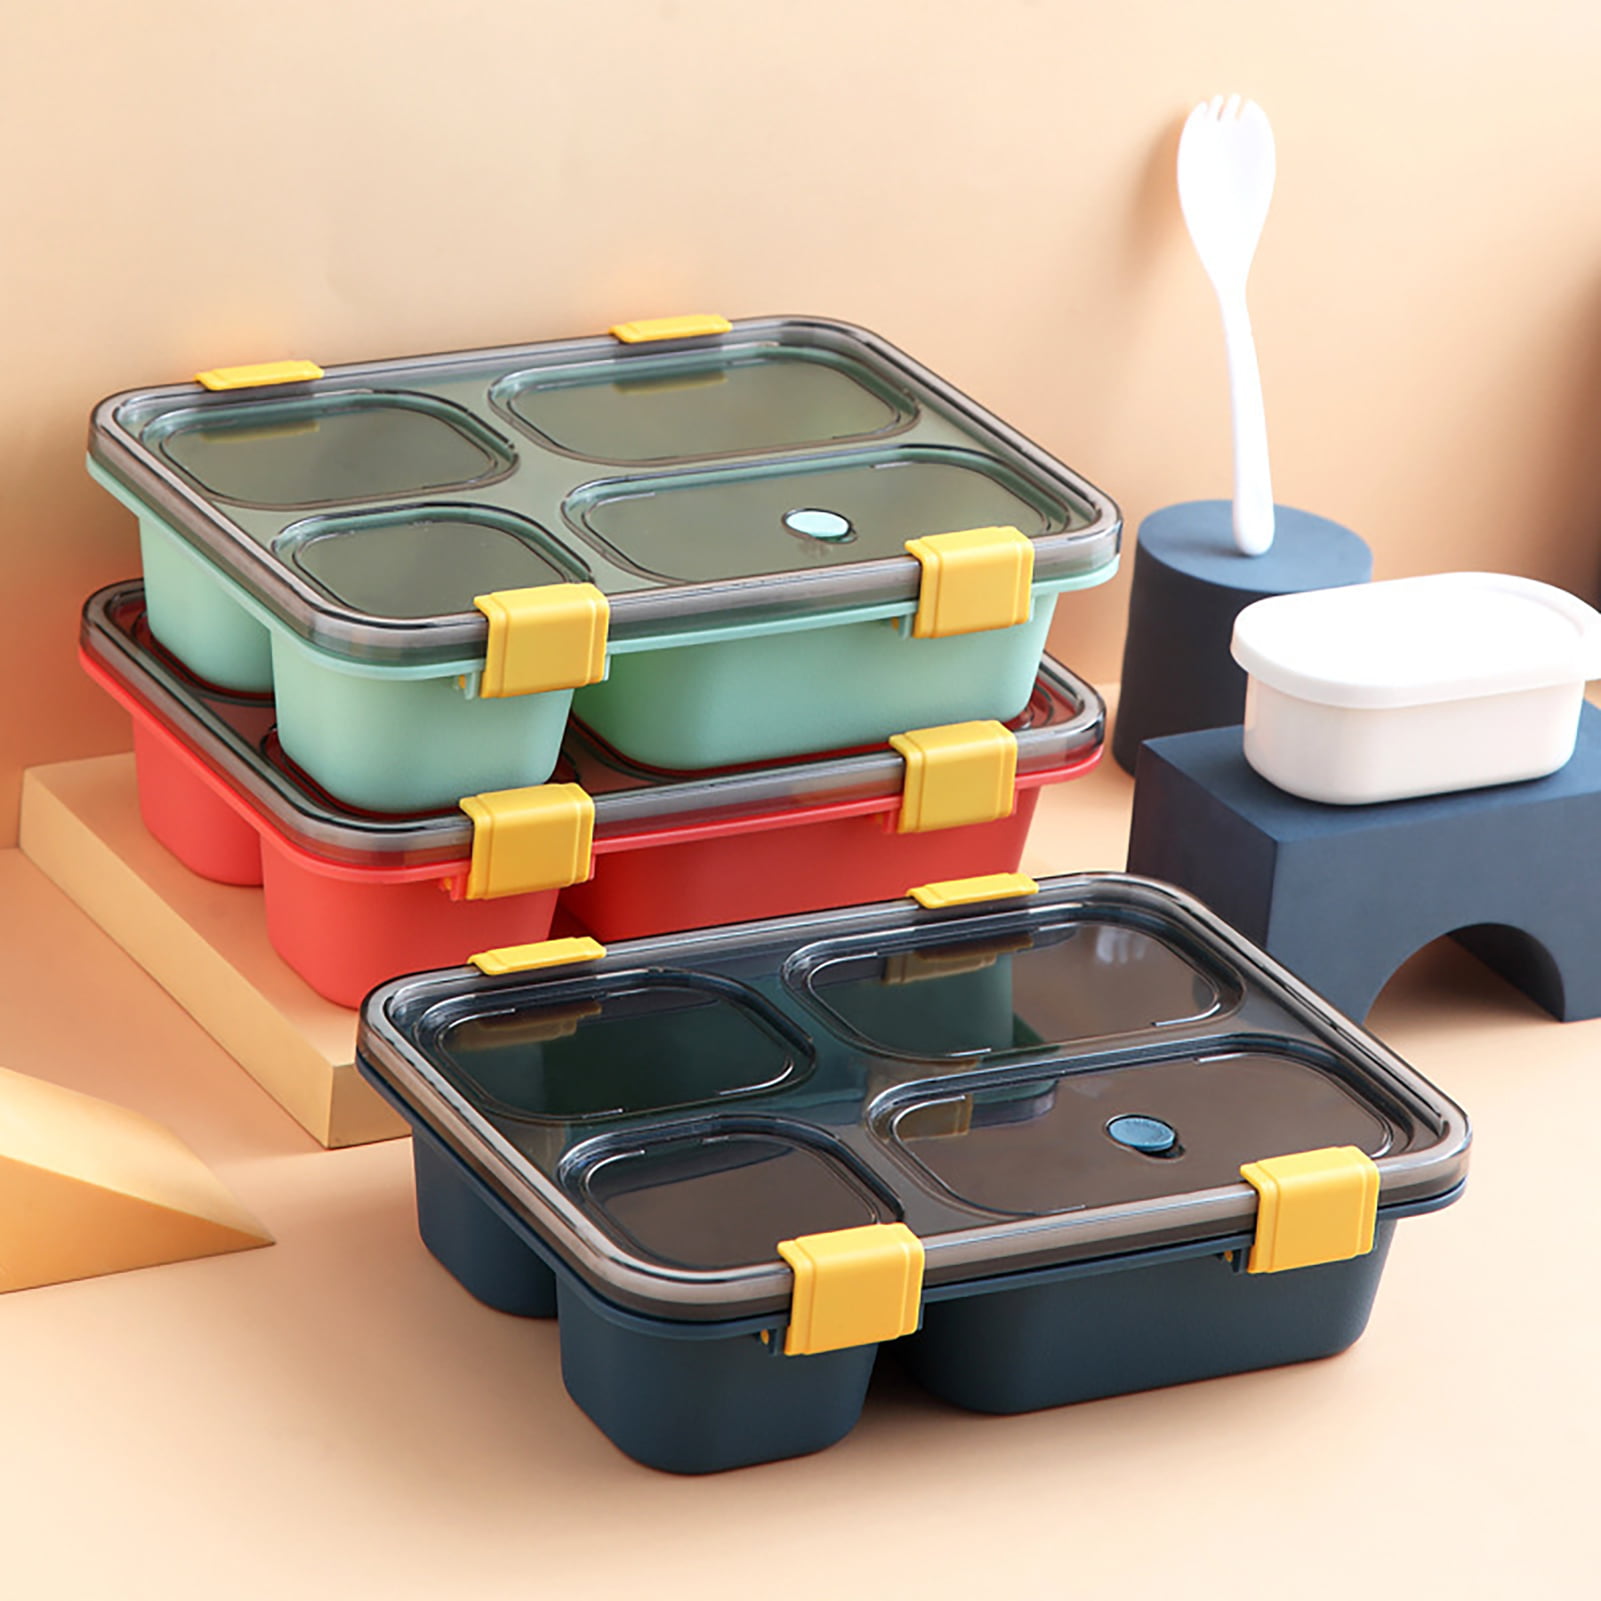 Zezzxu Bento Lunch Box for Kids and Adults, 1300 ML 4-Compartment Bento Box  with Accessories, Plasti…See more Zezzxu Bento Lunch Box for Kids and